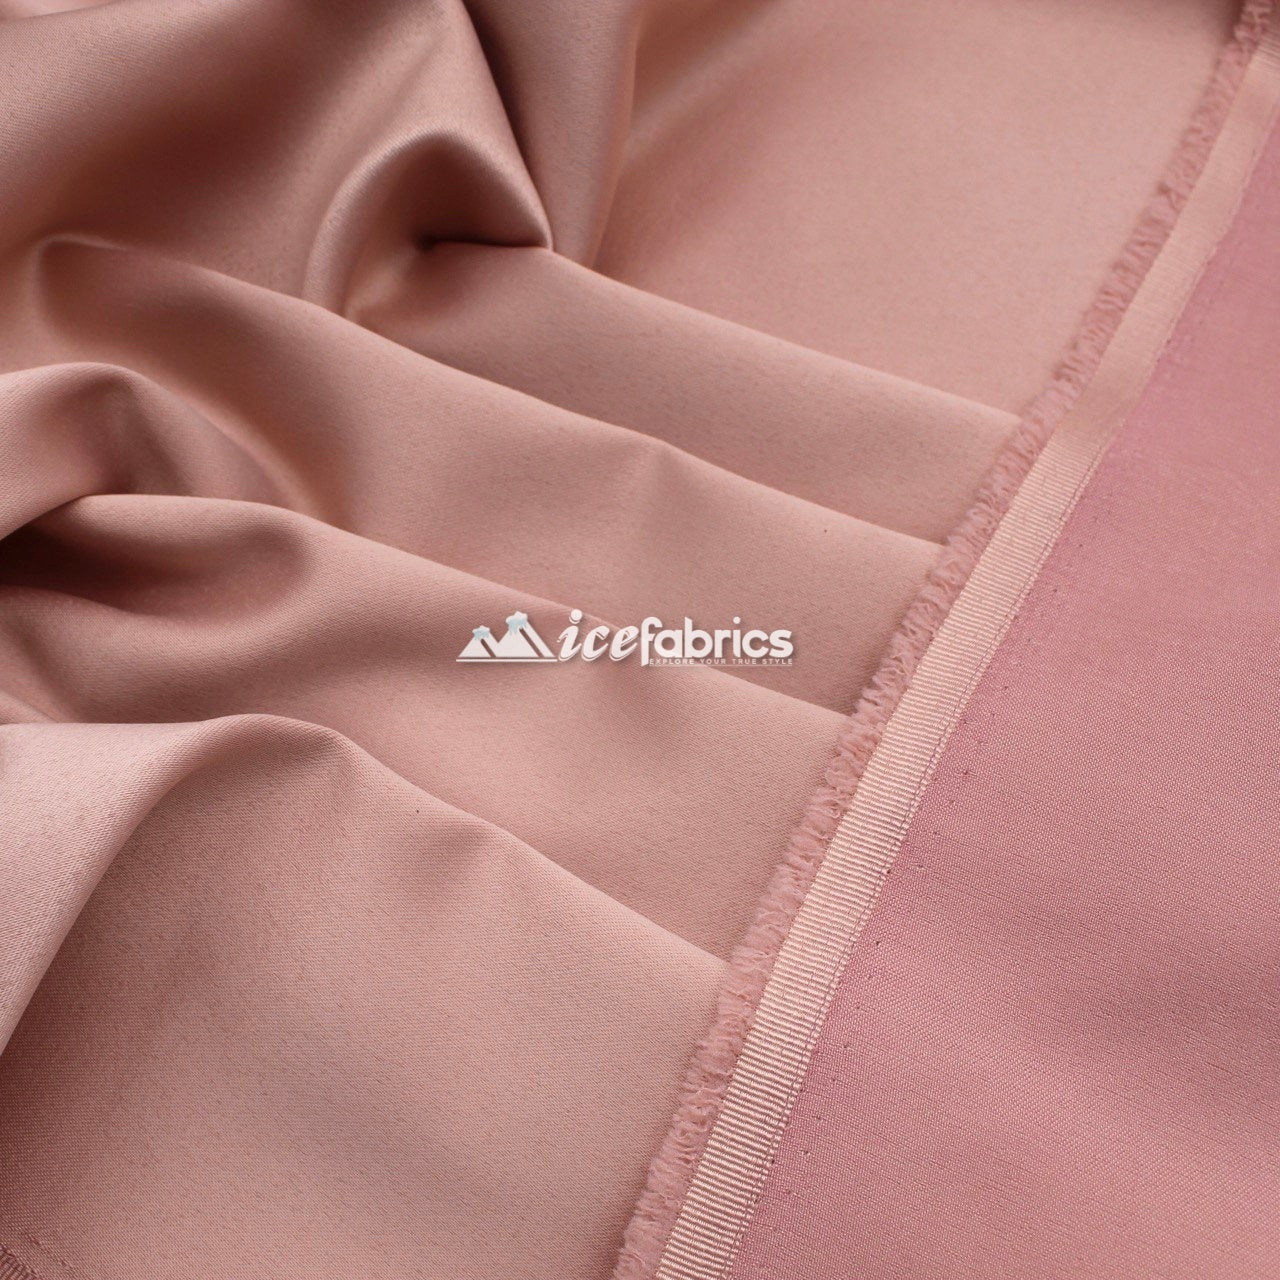 Armani Thick Solid Color Silky Stretch Satin Fabric Sold By The YardSatin FabricICE FABRICSICE FABRICSRose GoldArmani Thick Solid Color Silky Stretch Satin Fabric Sold By The Yard ICE FABRICS Rose Gold